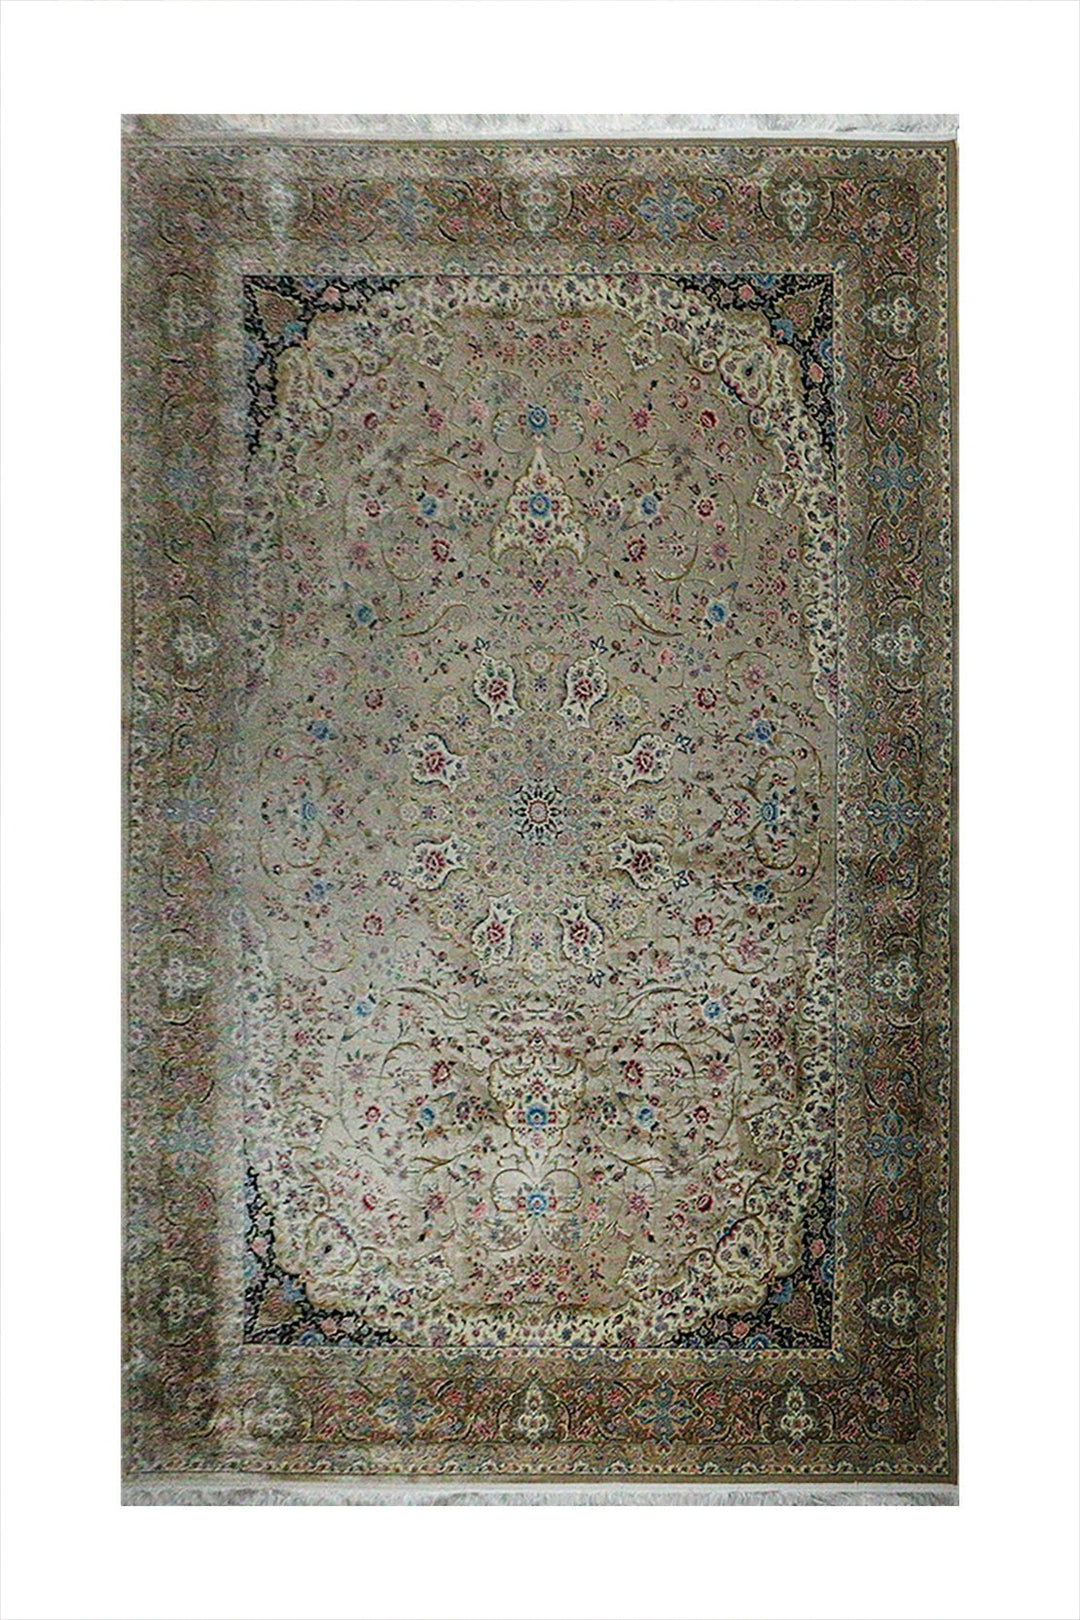 Iranian Premium Quality Silk 1500 Rug - 8.2 x 11.4 FT - Beige - Resilient Construction for Long-Lasting Use - V Surfaces